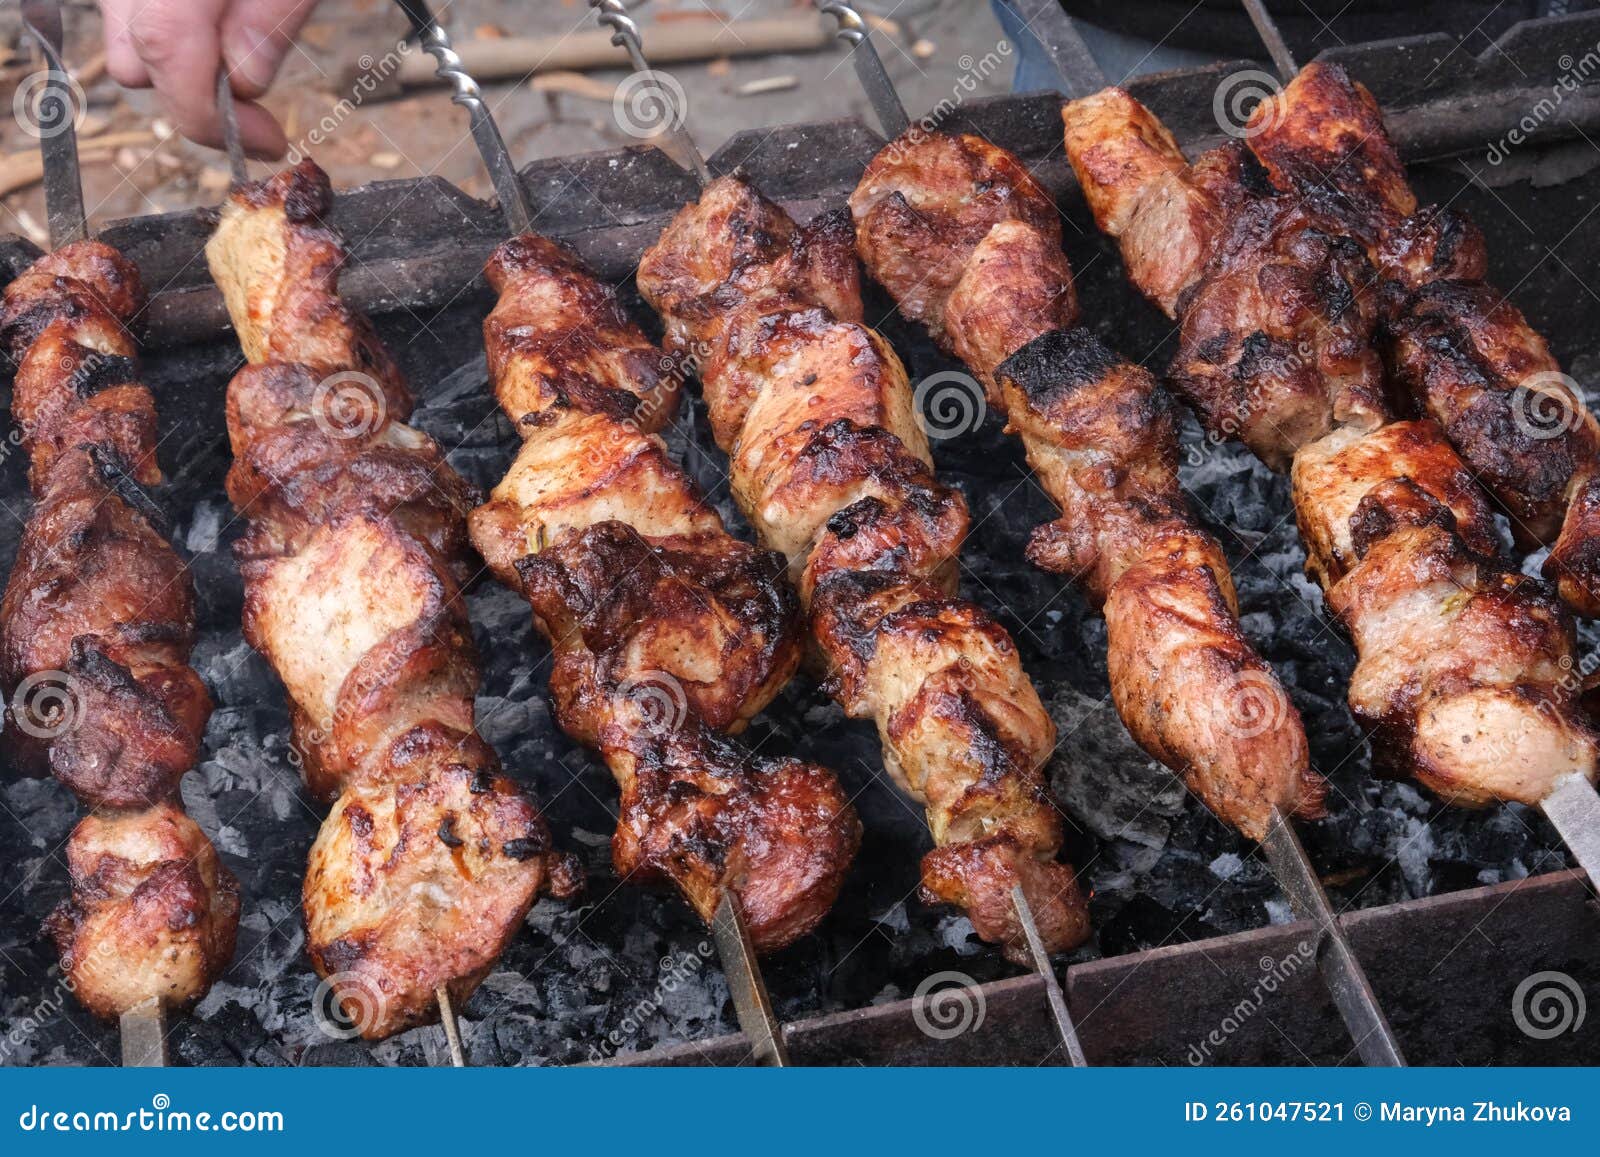 A Man Roasts Meat on a Fire. Onion and Barbecue. Grilling Pork Neck ...